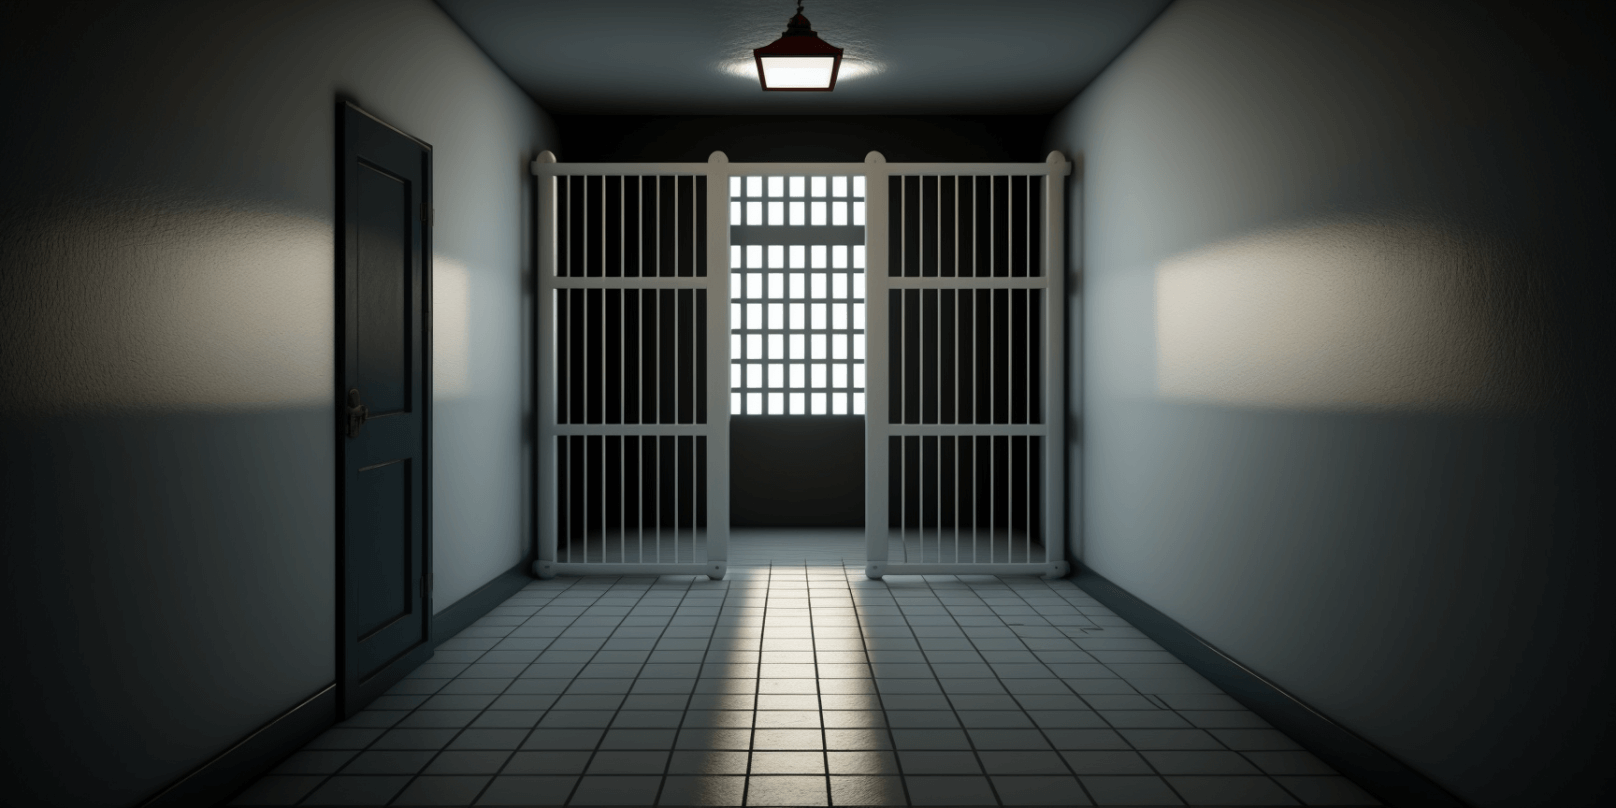 Empty prison cell, art generated by Midjourney